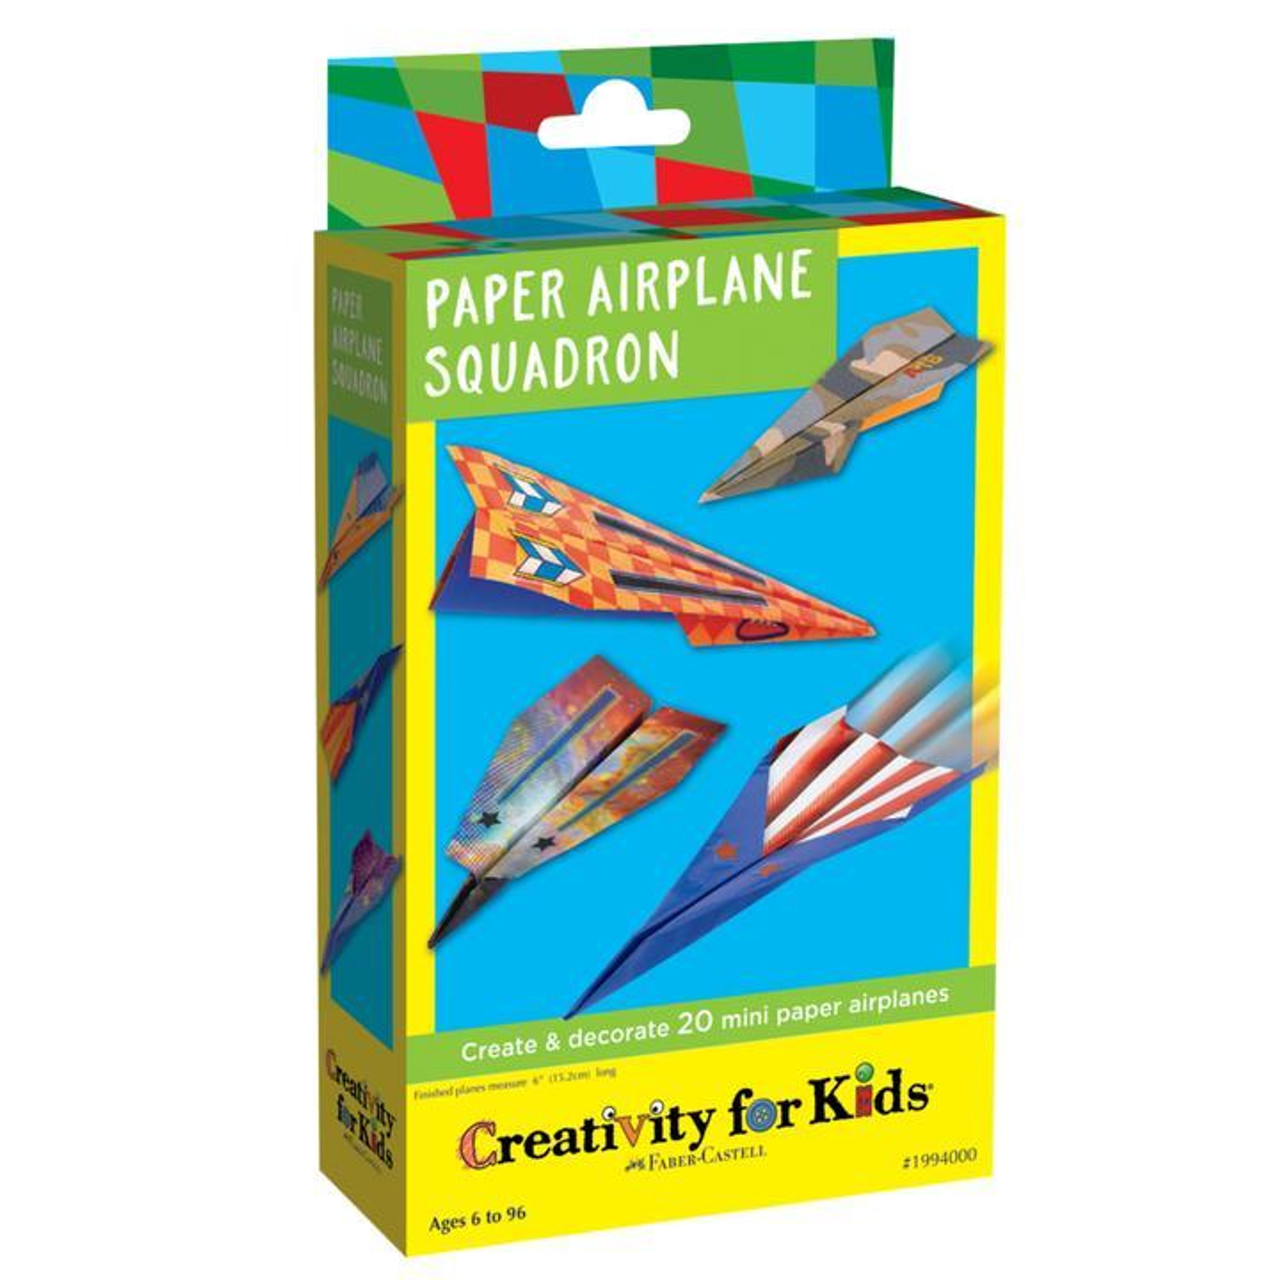 Flying Dragons Paper Airplane Kit: 48 Paper Airplanes, 64 Page Instruction Book, 12 Original Designs,  Video Tutorials [Book]